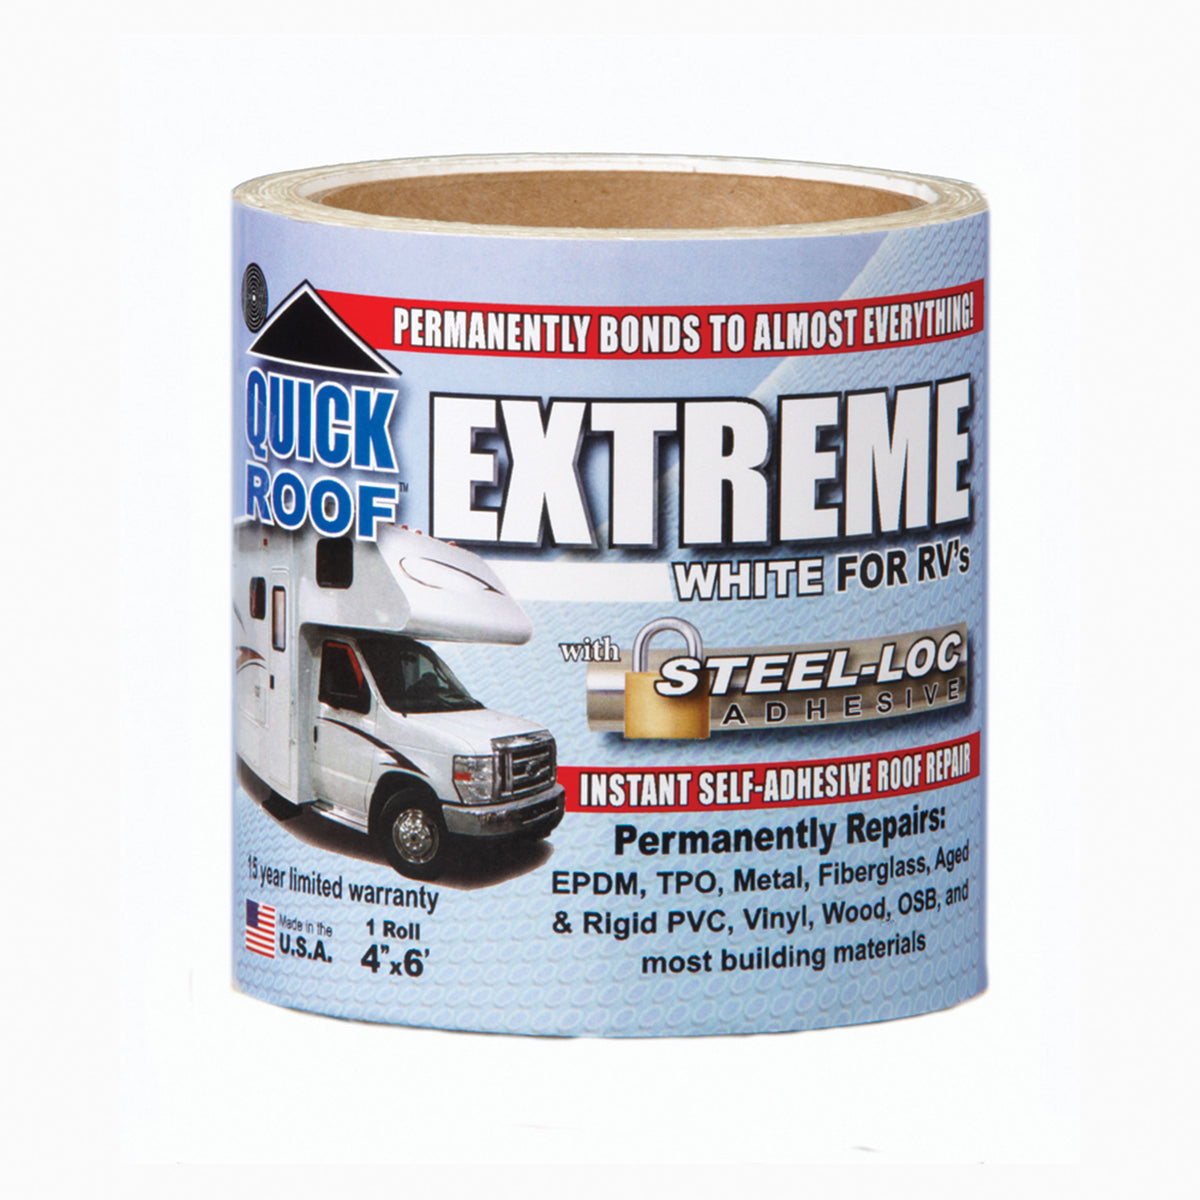 Cofair Products UBE475 Quick Roof Extreme With Steel-Loc Adhesive - 4" x 75', White